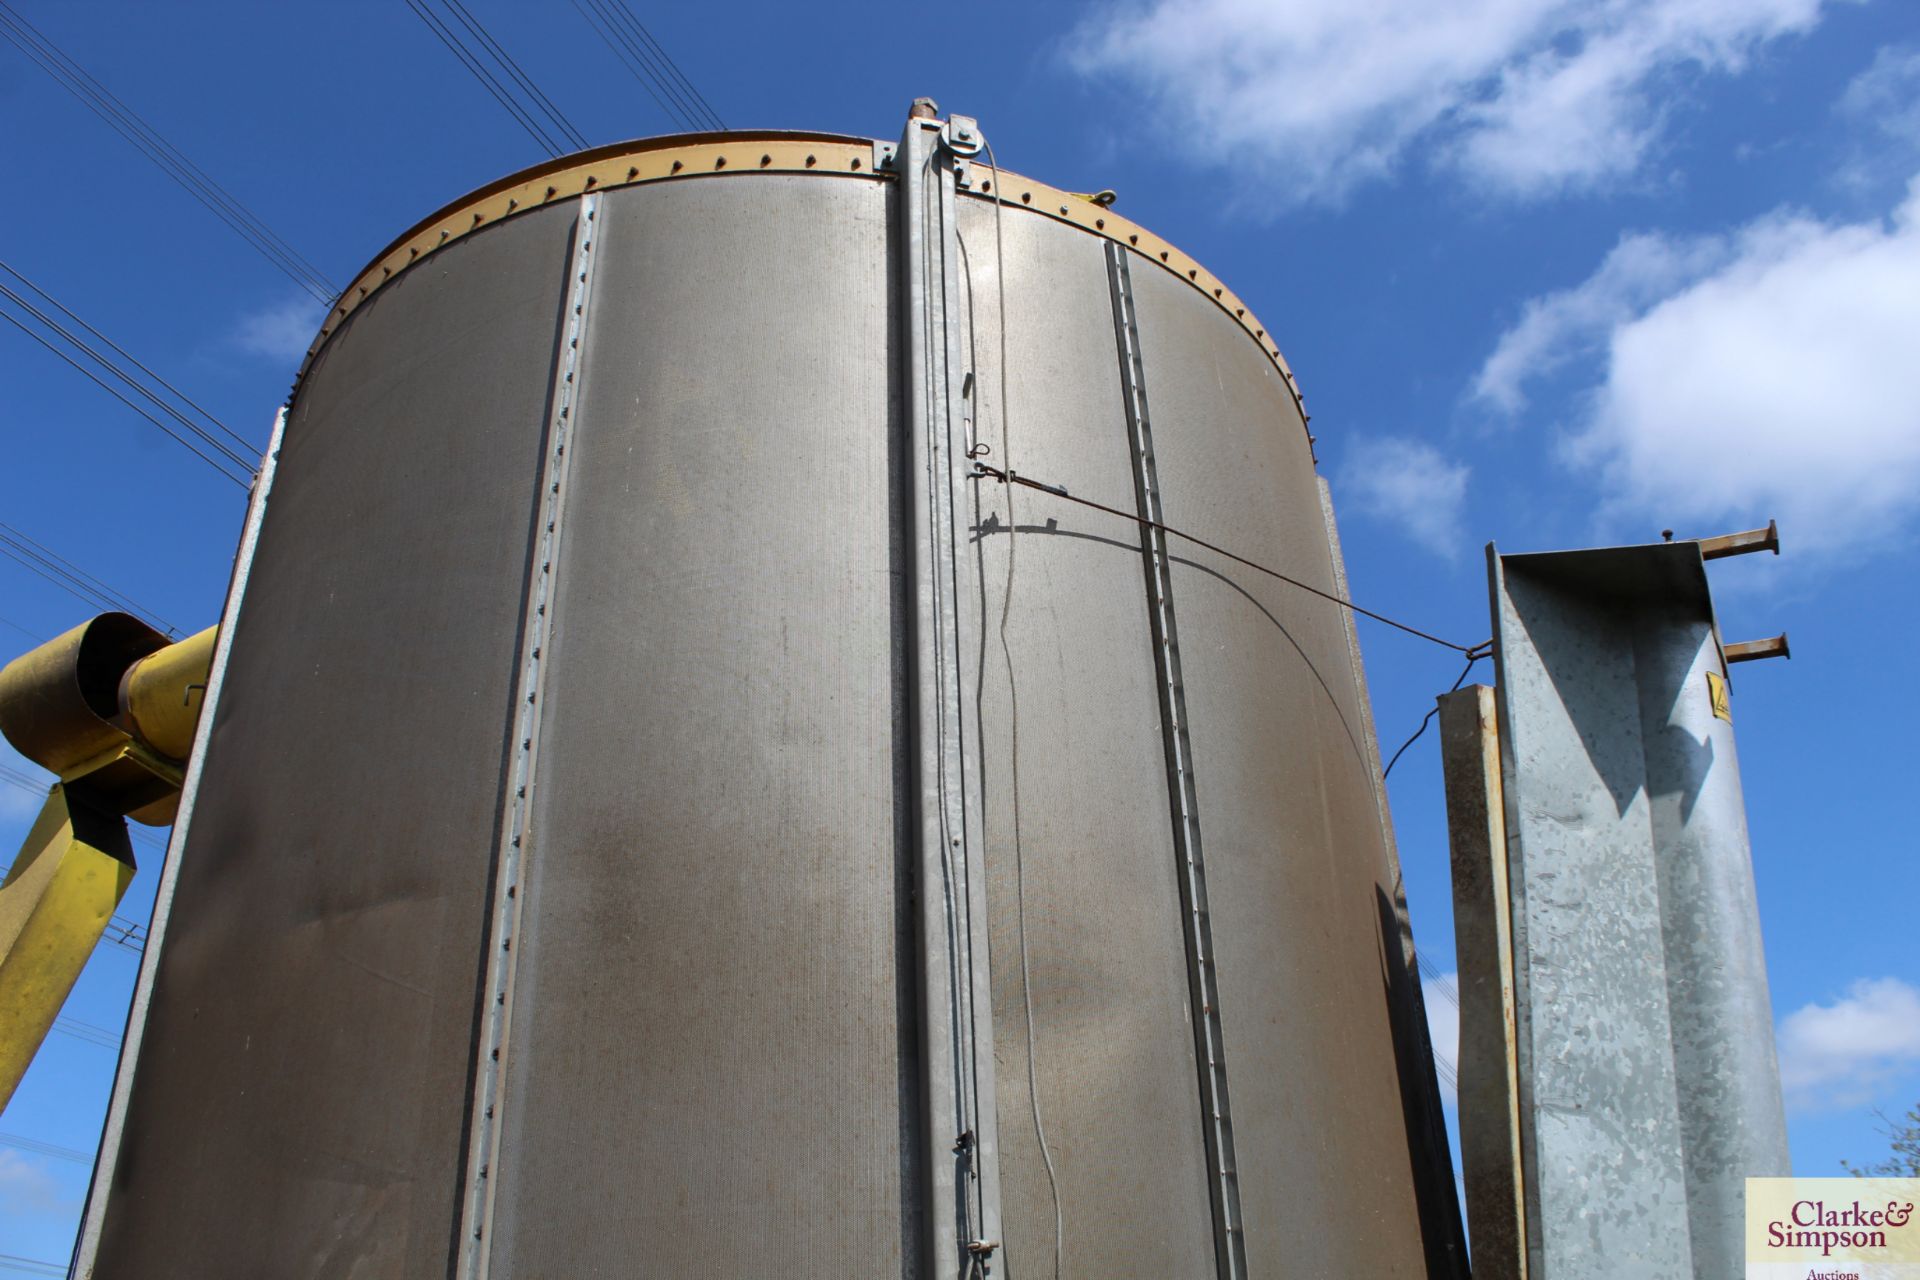 Mecmar 13T mobile grain drier. 326 hours. For sale due to retirement. V - Image 8 of 21